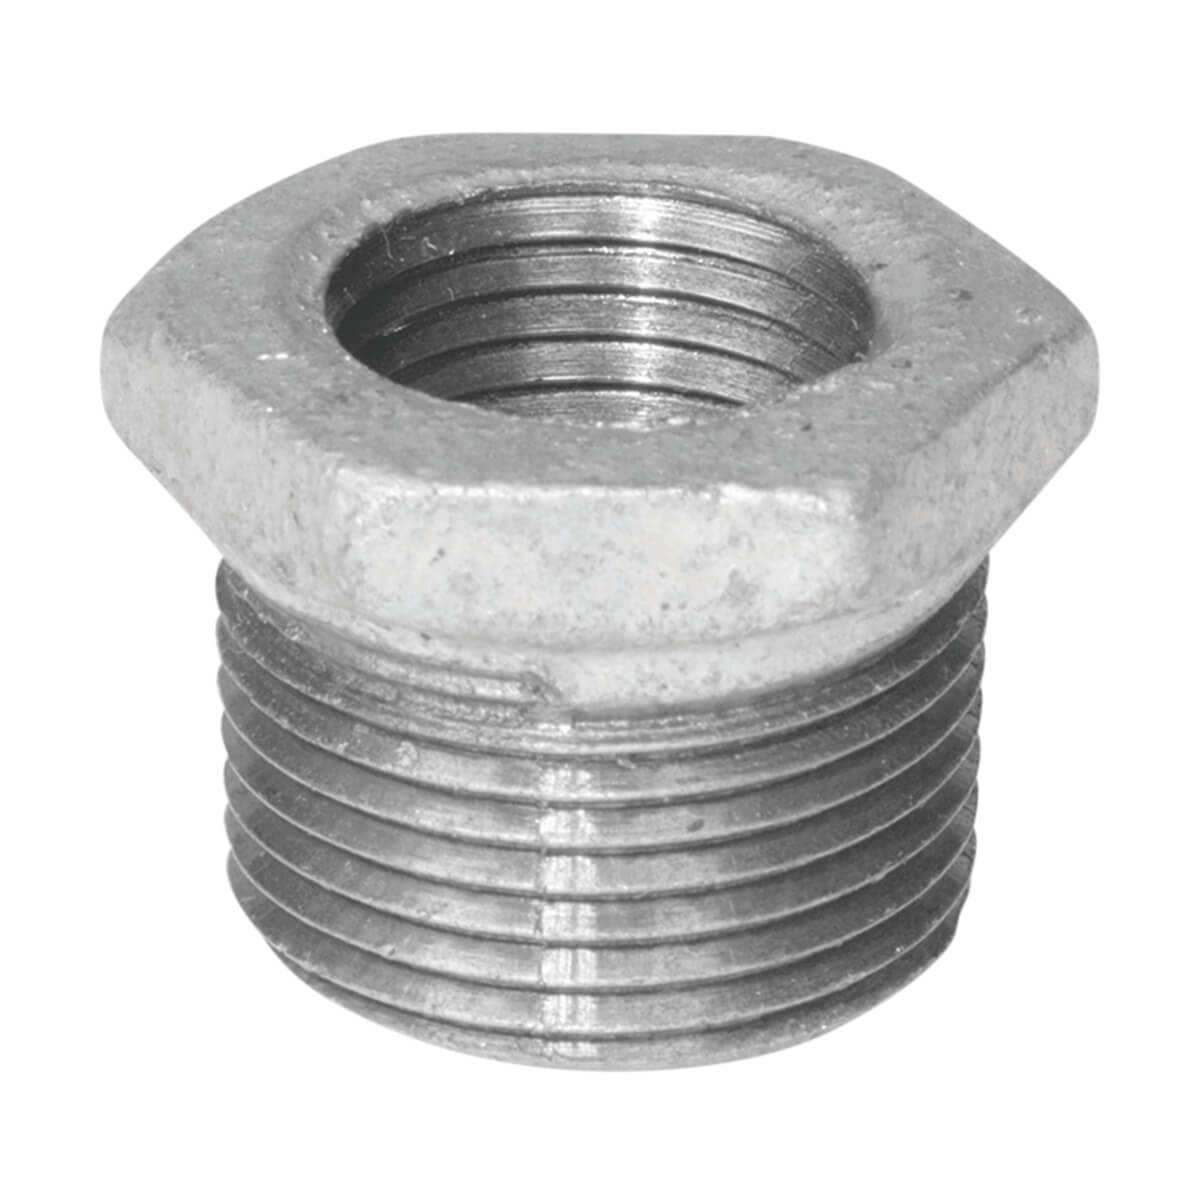 Fitting Galvanized Iron Hex Bushing - 3/8-in x 1/8-in